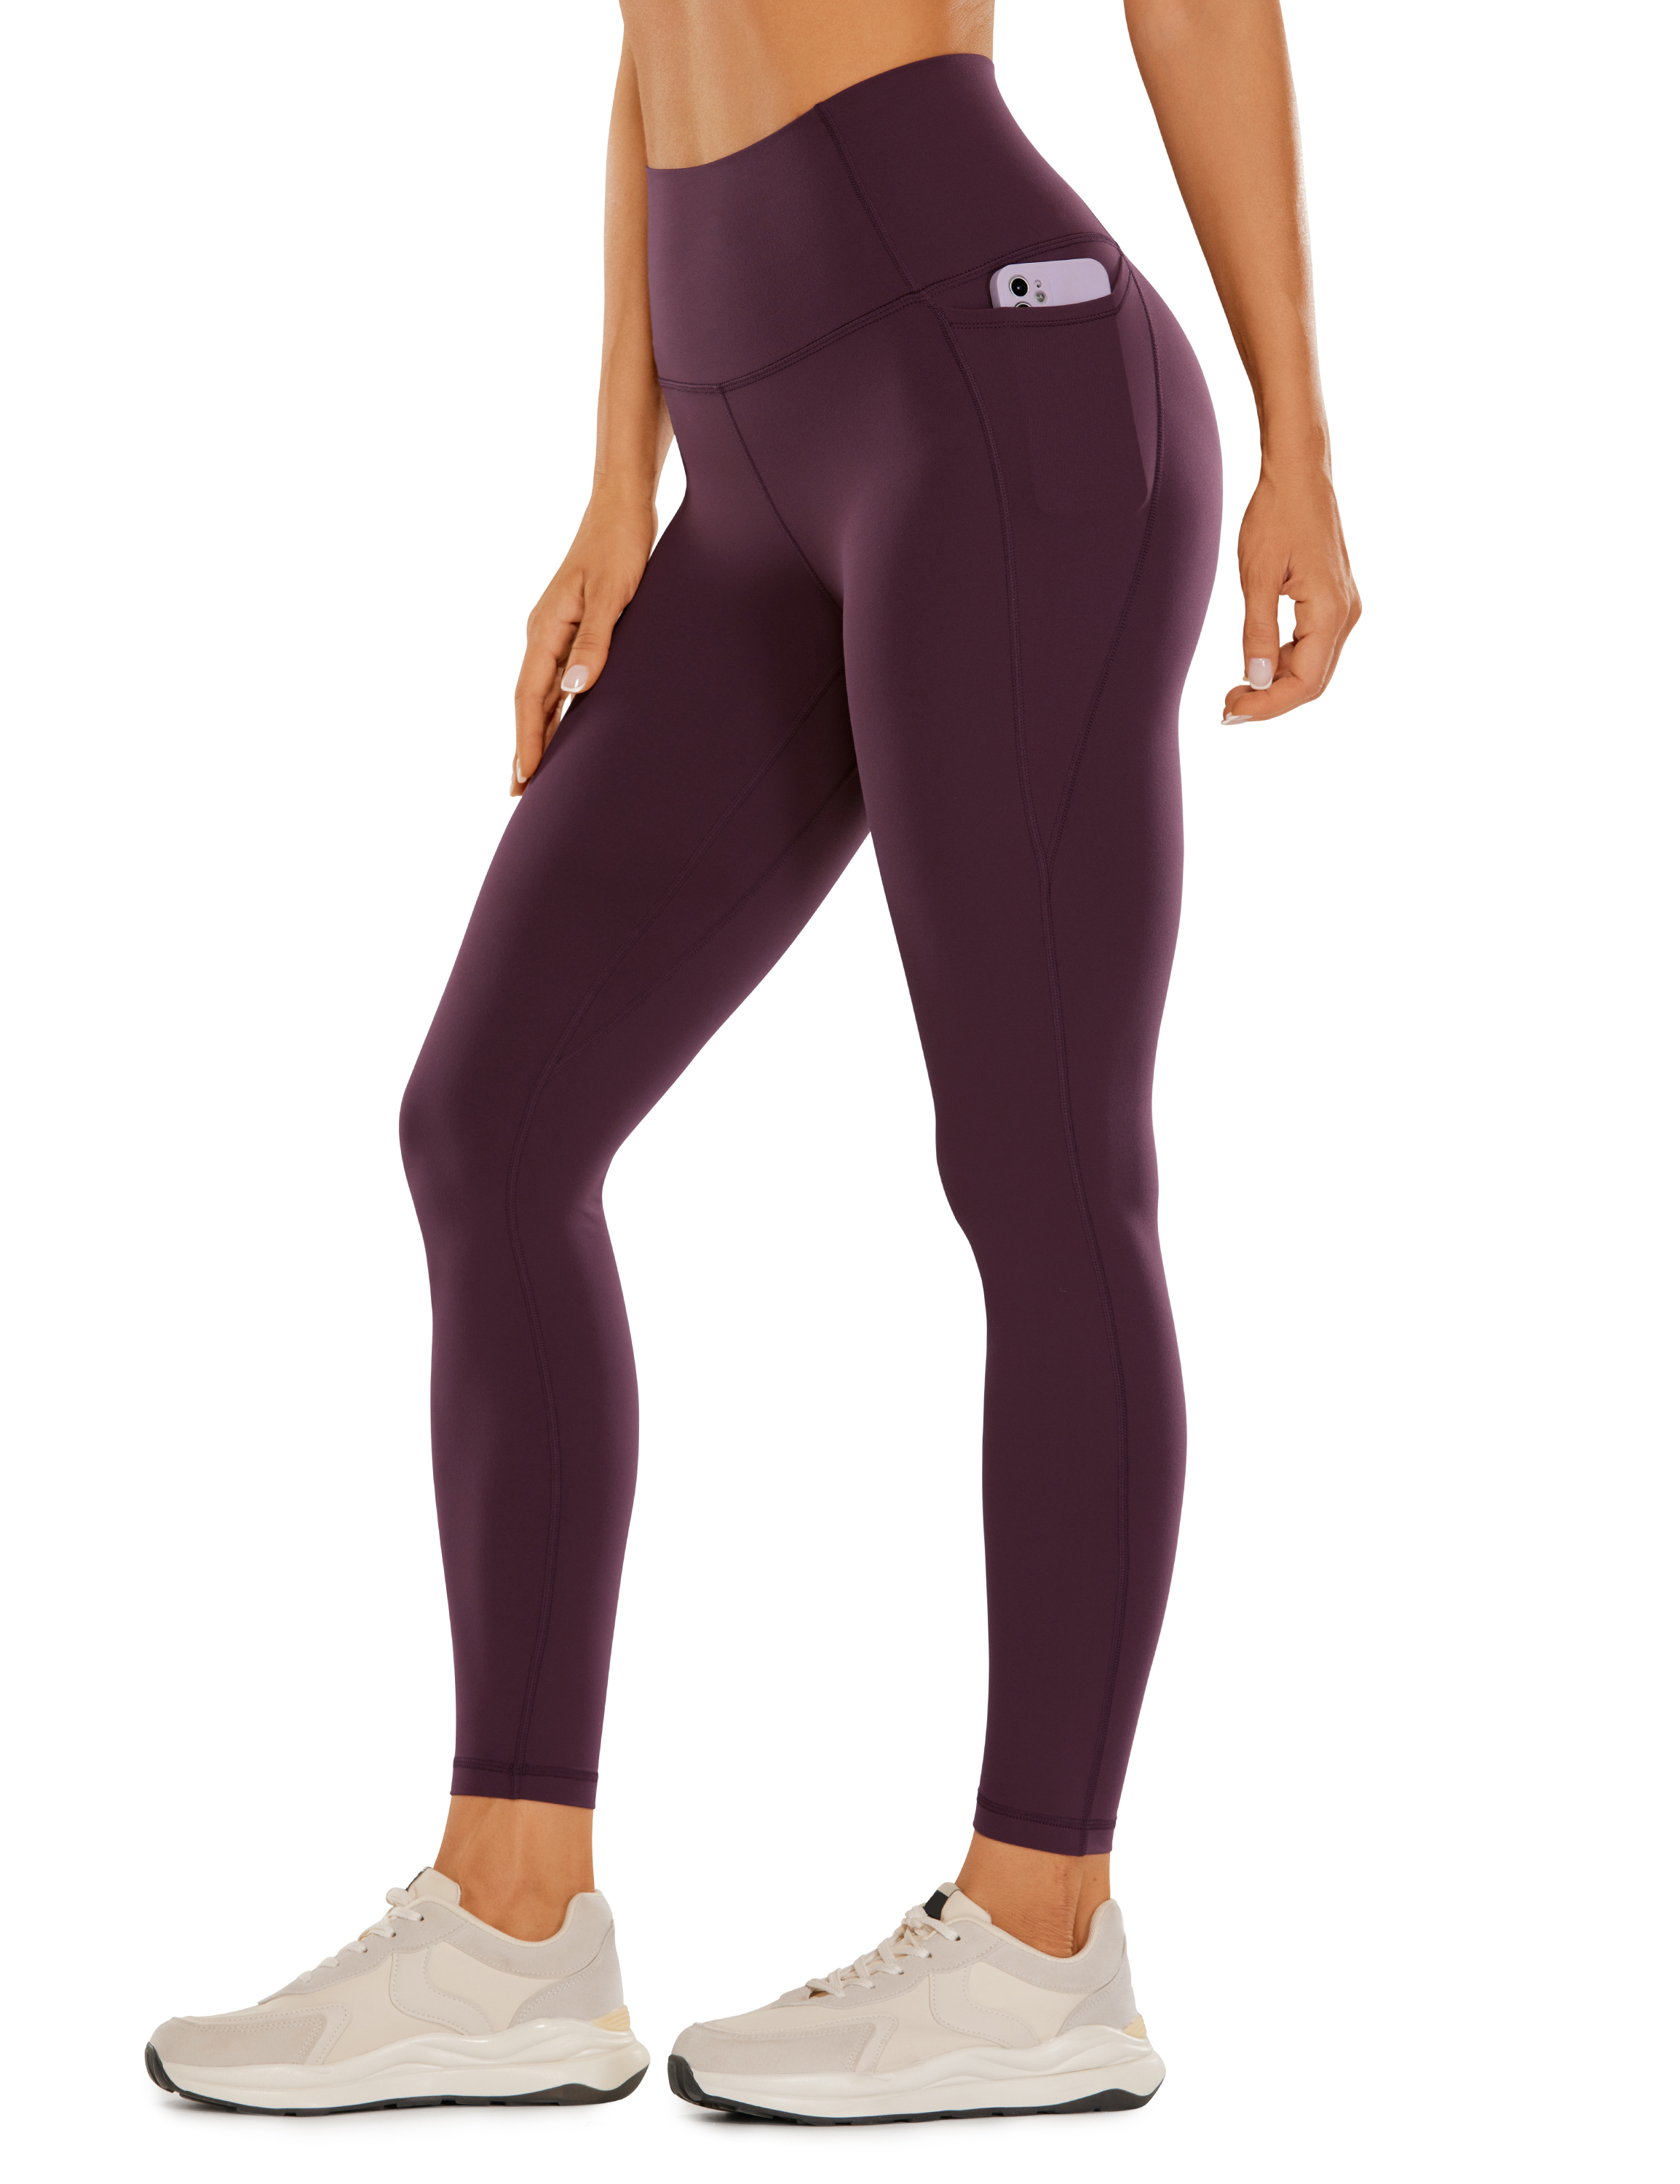  CRZ YOGA Womens Butterluxe Workout Leggings 25 Inches - High  Waisted Gym Yoga Pants